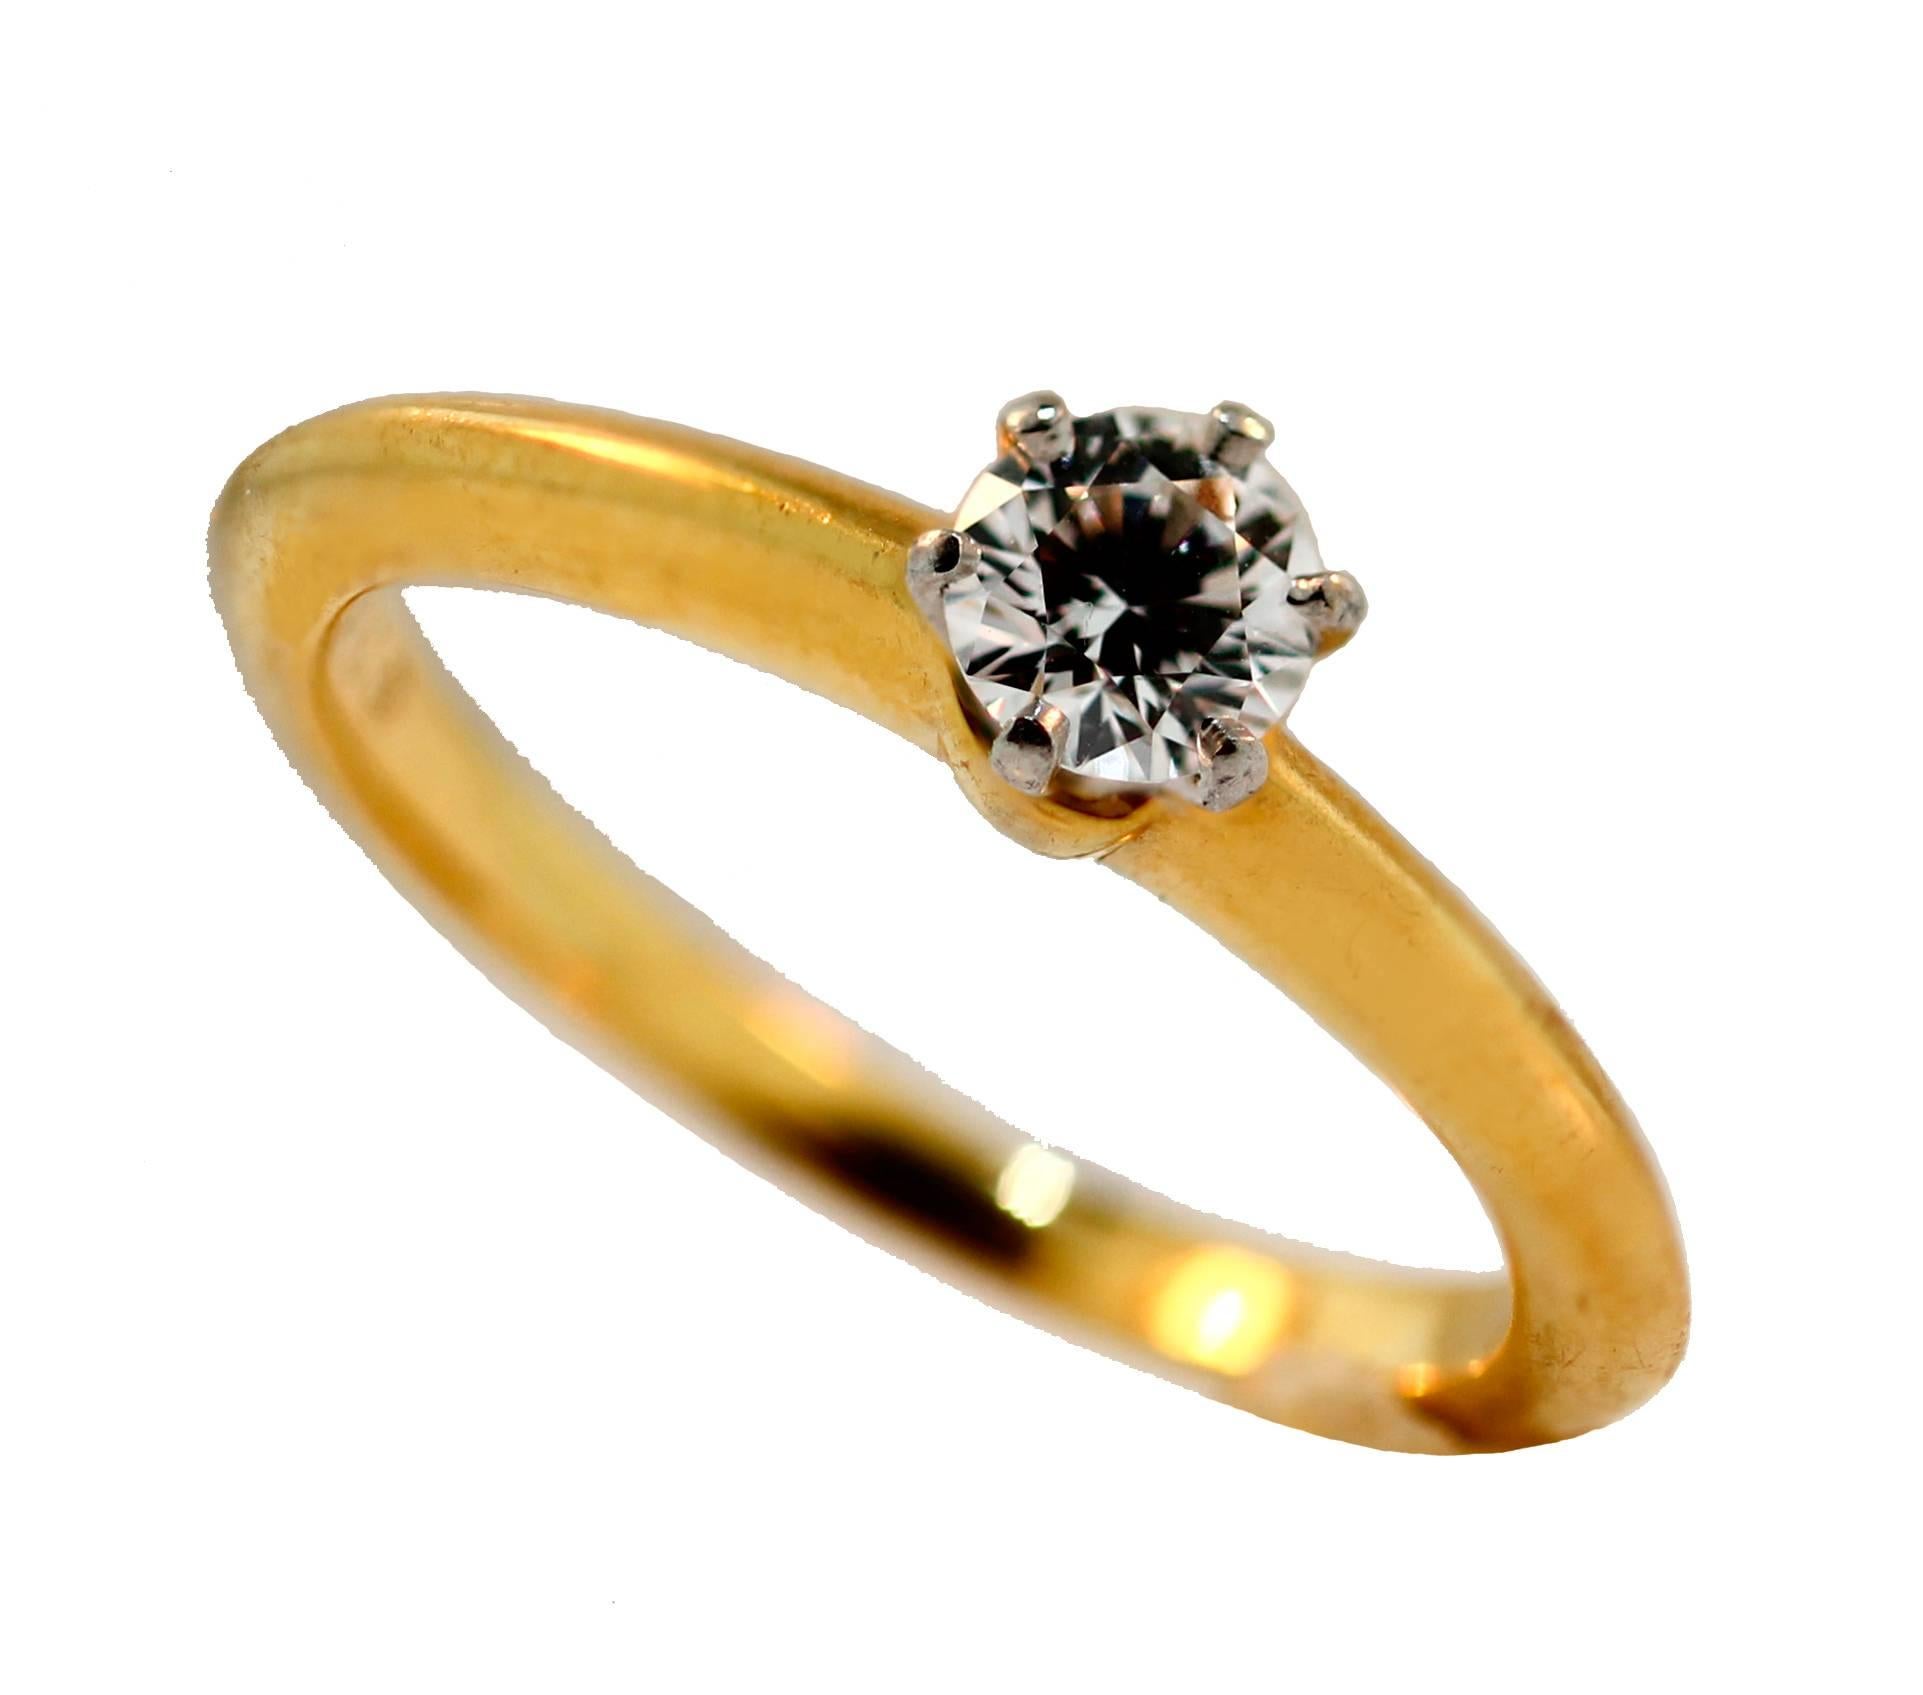 Tiffany & Co. Diamond Gold Solitaire Ring For Sale 2